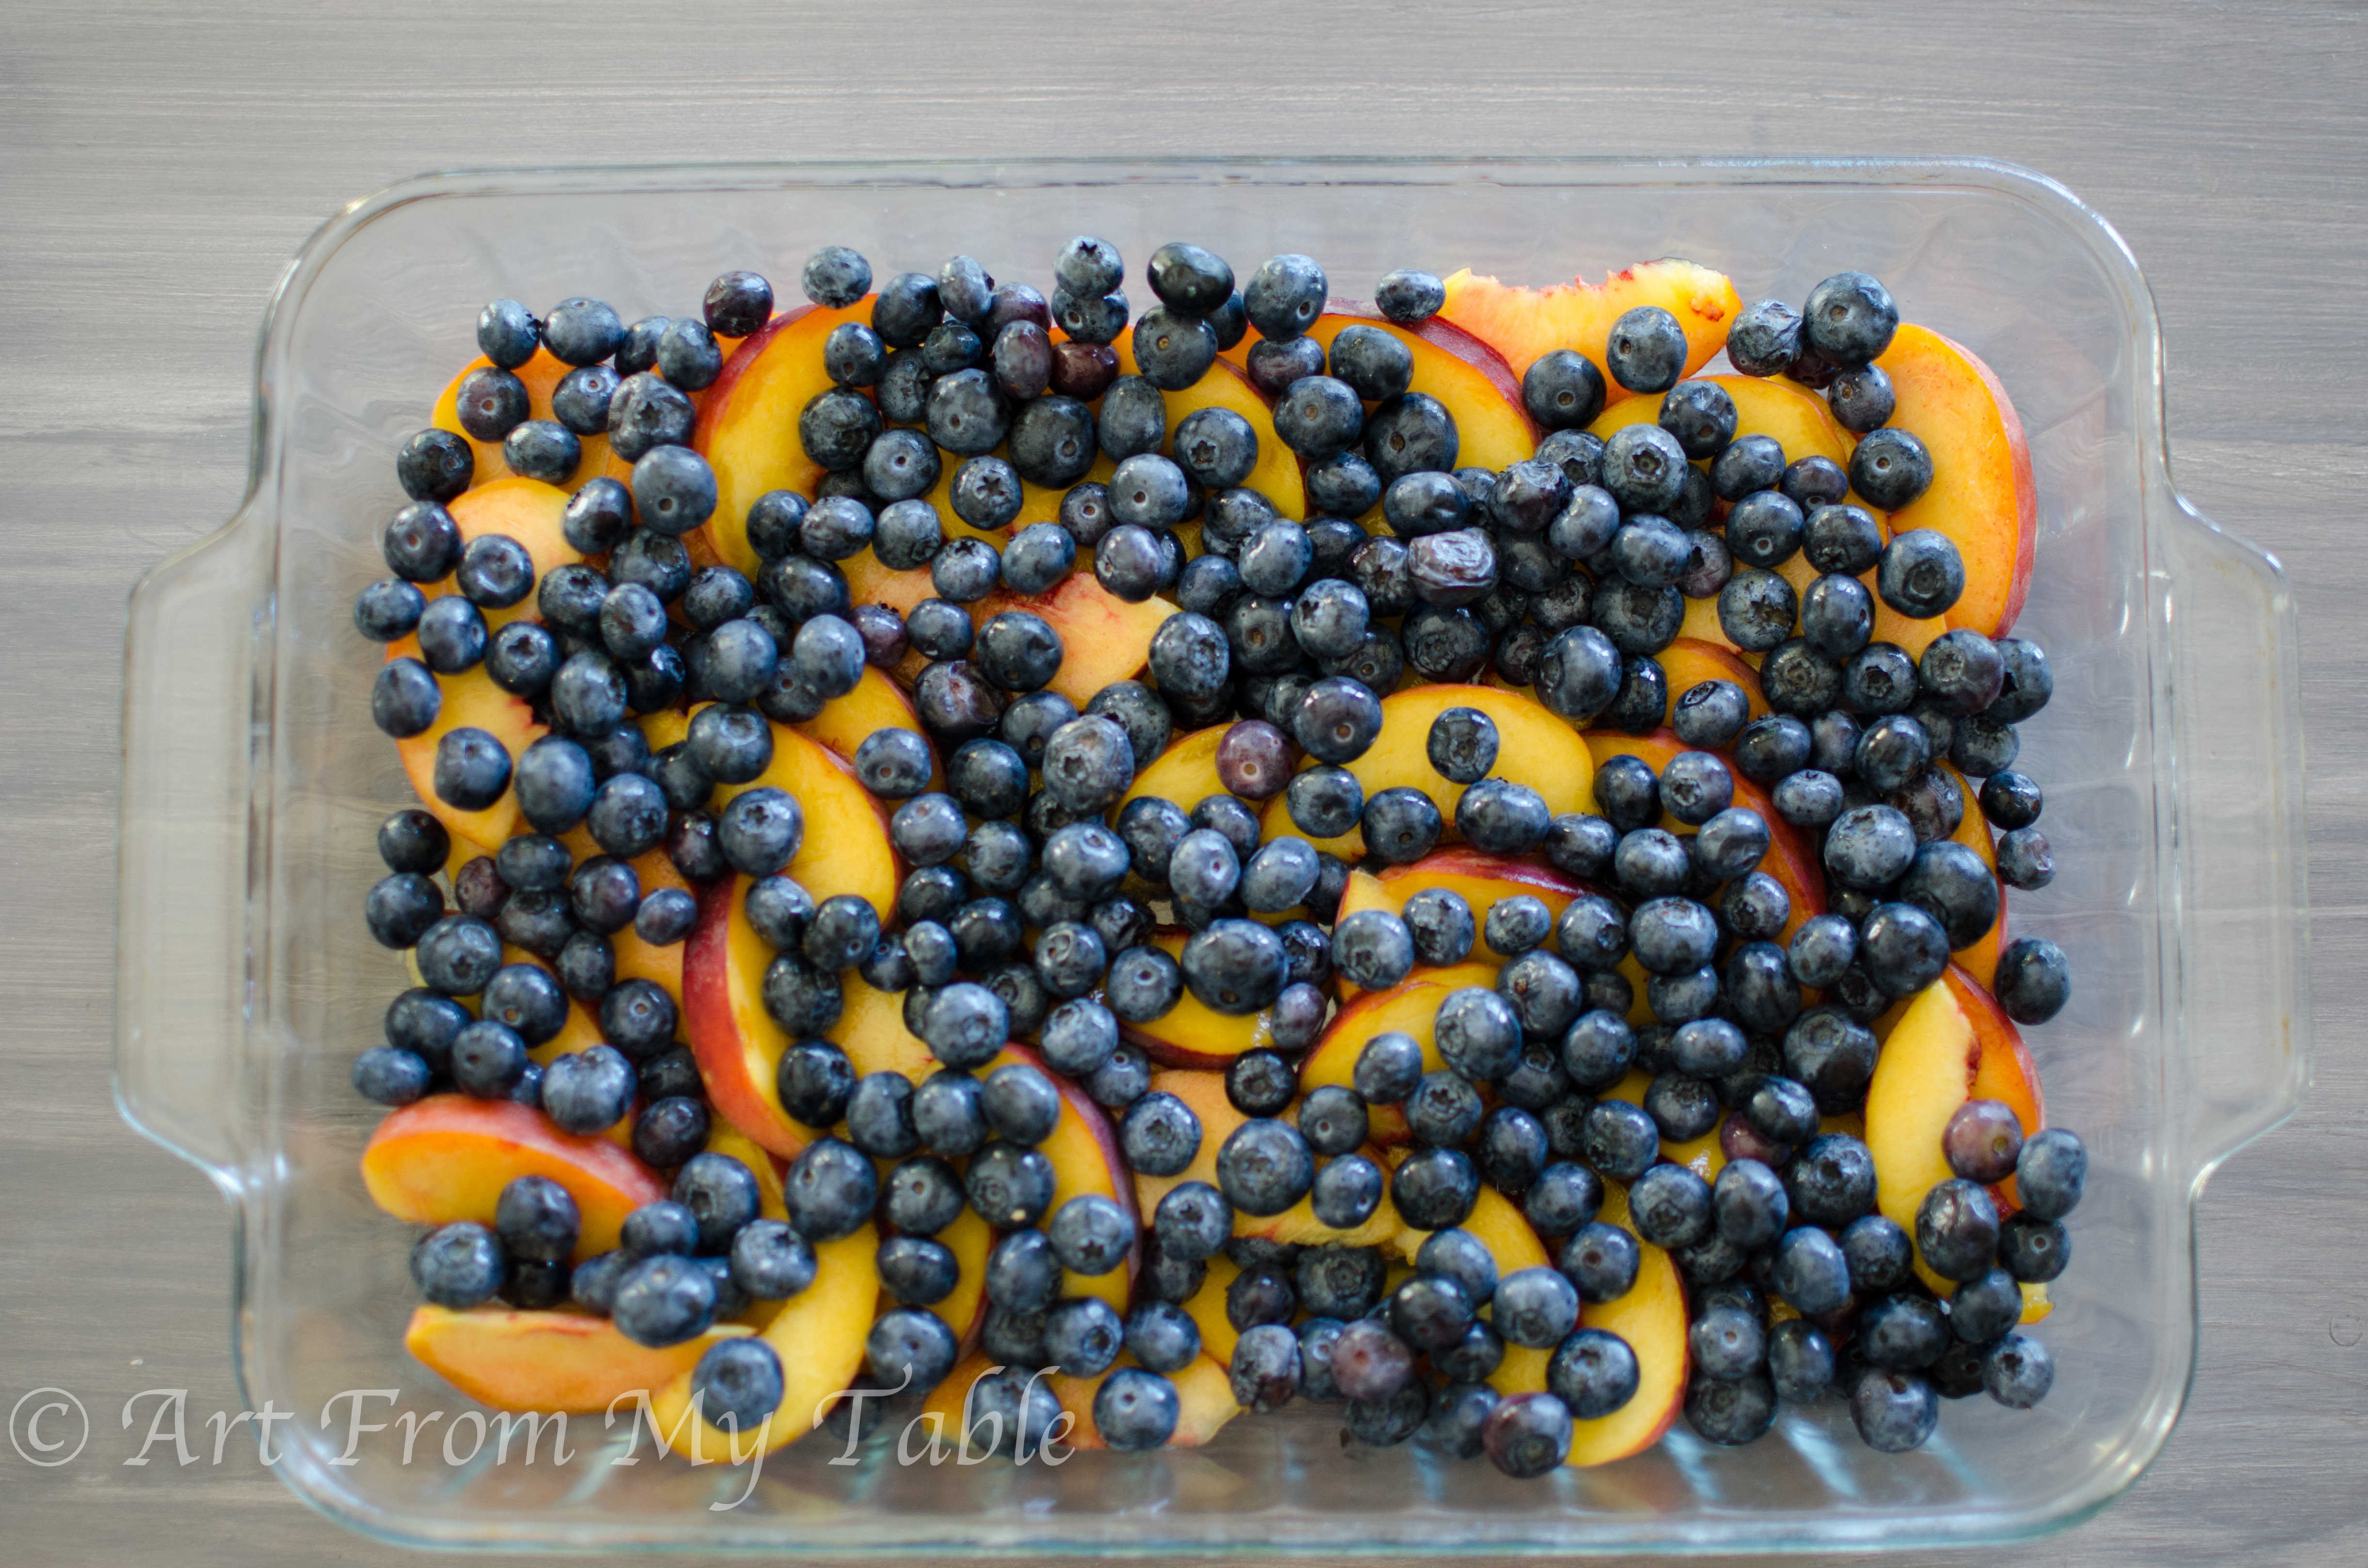 Fresh peaches and fresh blueberries scattered in a 9x13 glass dish.